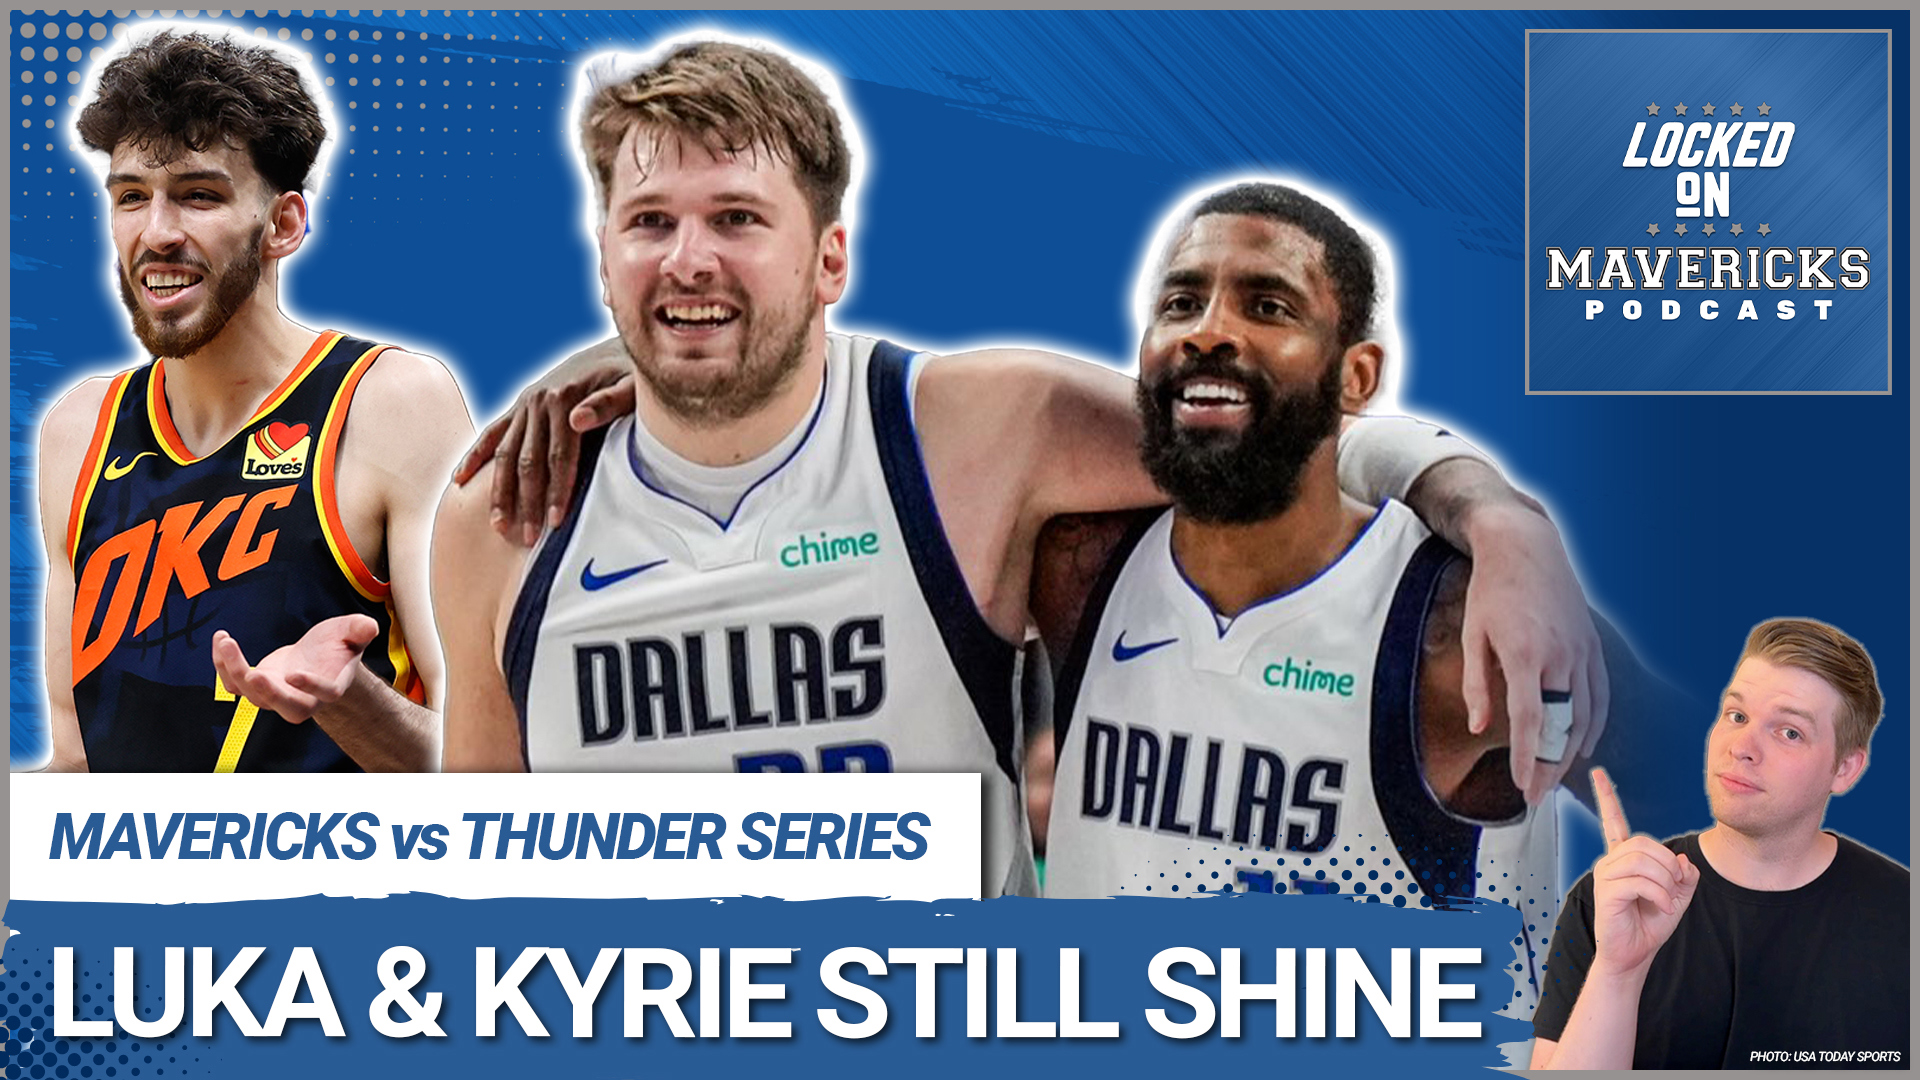 Nick Angstadt shares why Luka Doncic & Kyrie Irving are still the #1 reason the Dallas Mavericks are up 2-1 against the Oklahoma City Thunder